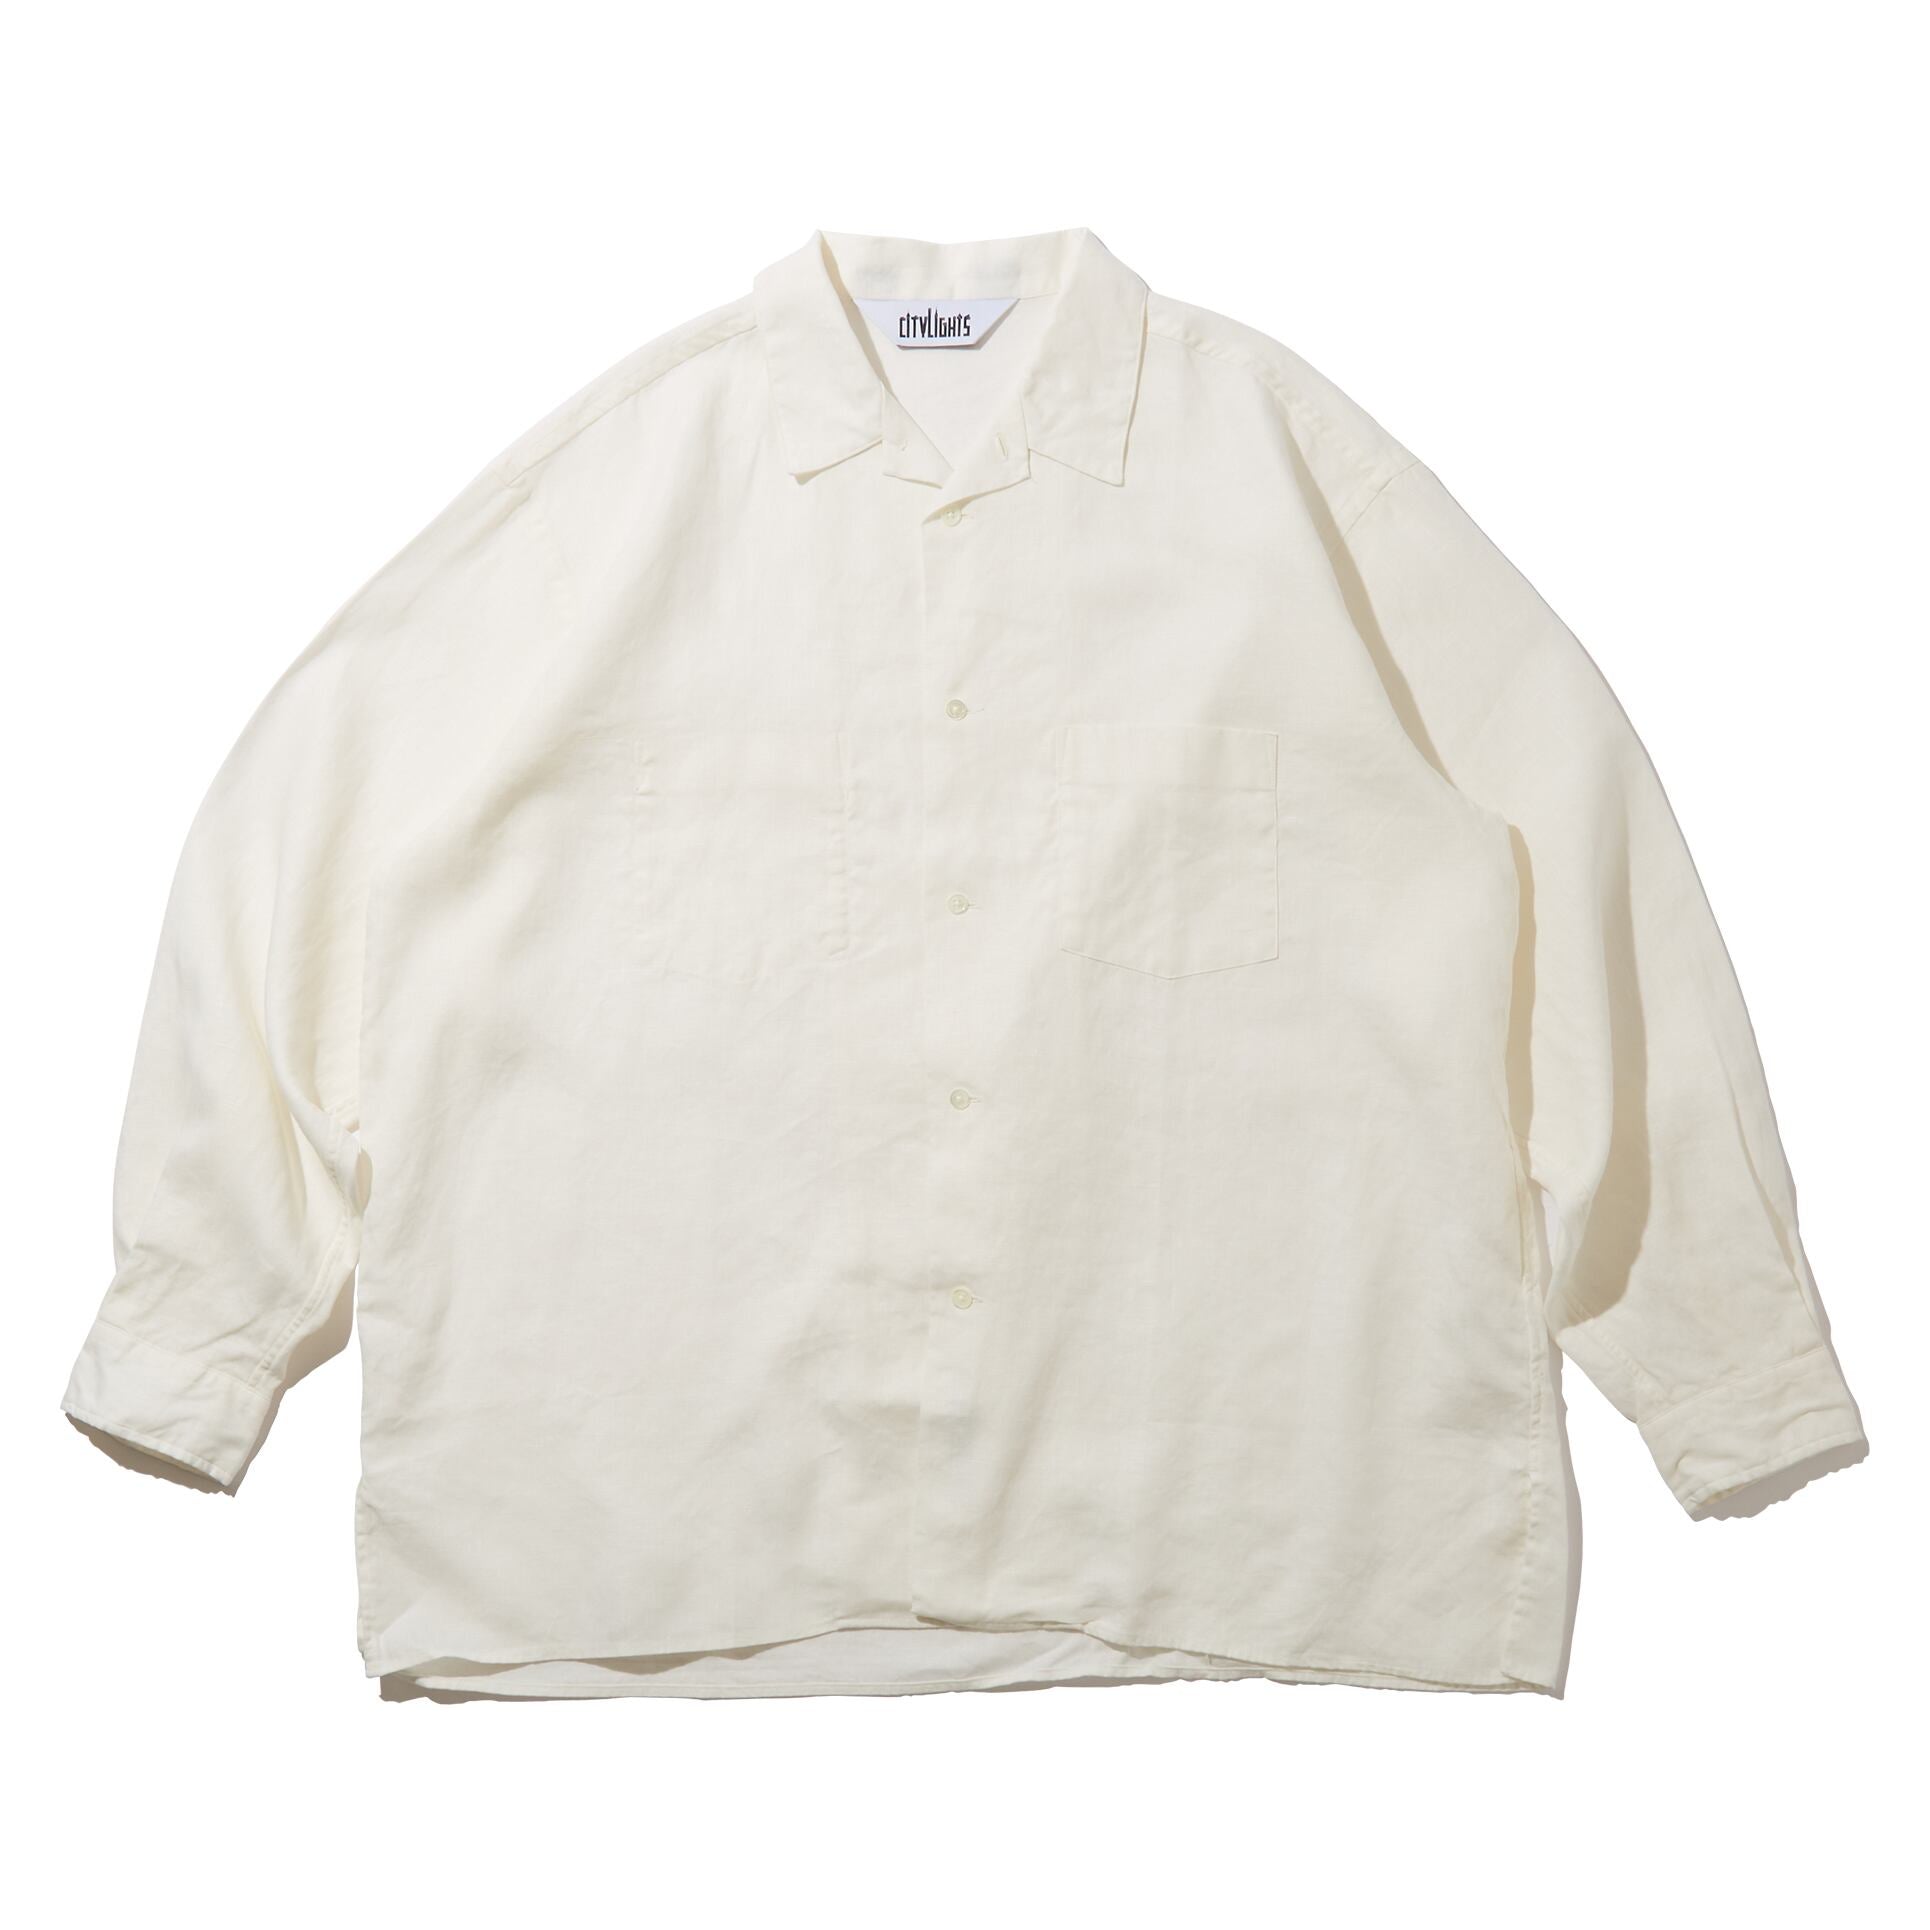 Name:DULL COLLAR SHIRT | Color:White Linen | Size:Regular/Tall 【CITYLIGHTS PRODUCTS_シティライツプロダクツ】